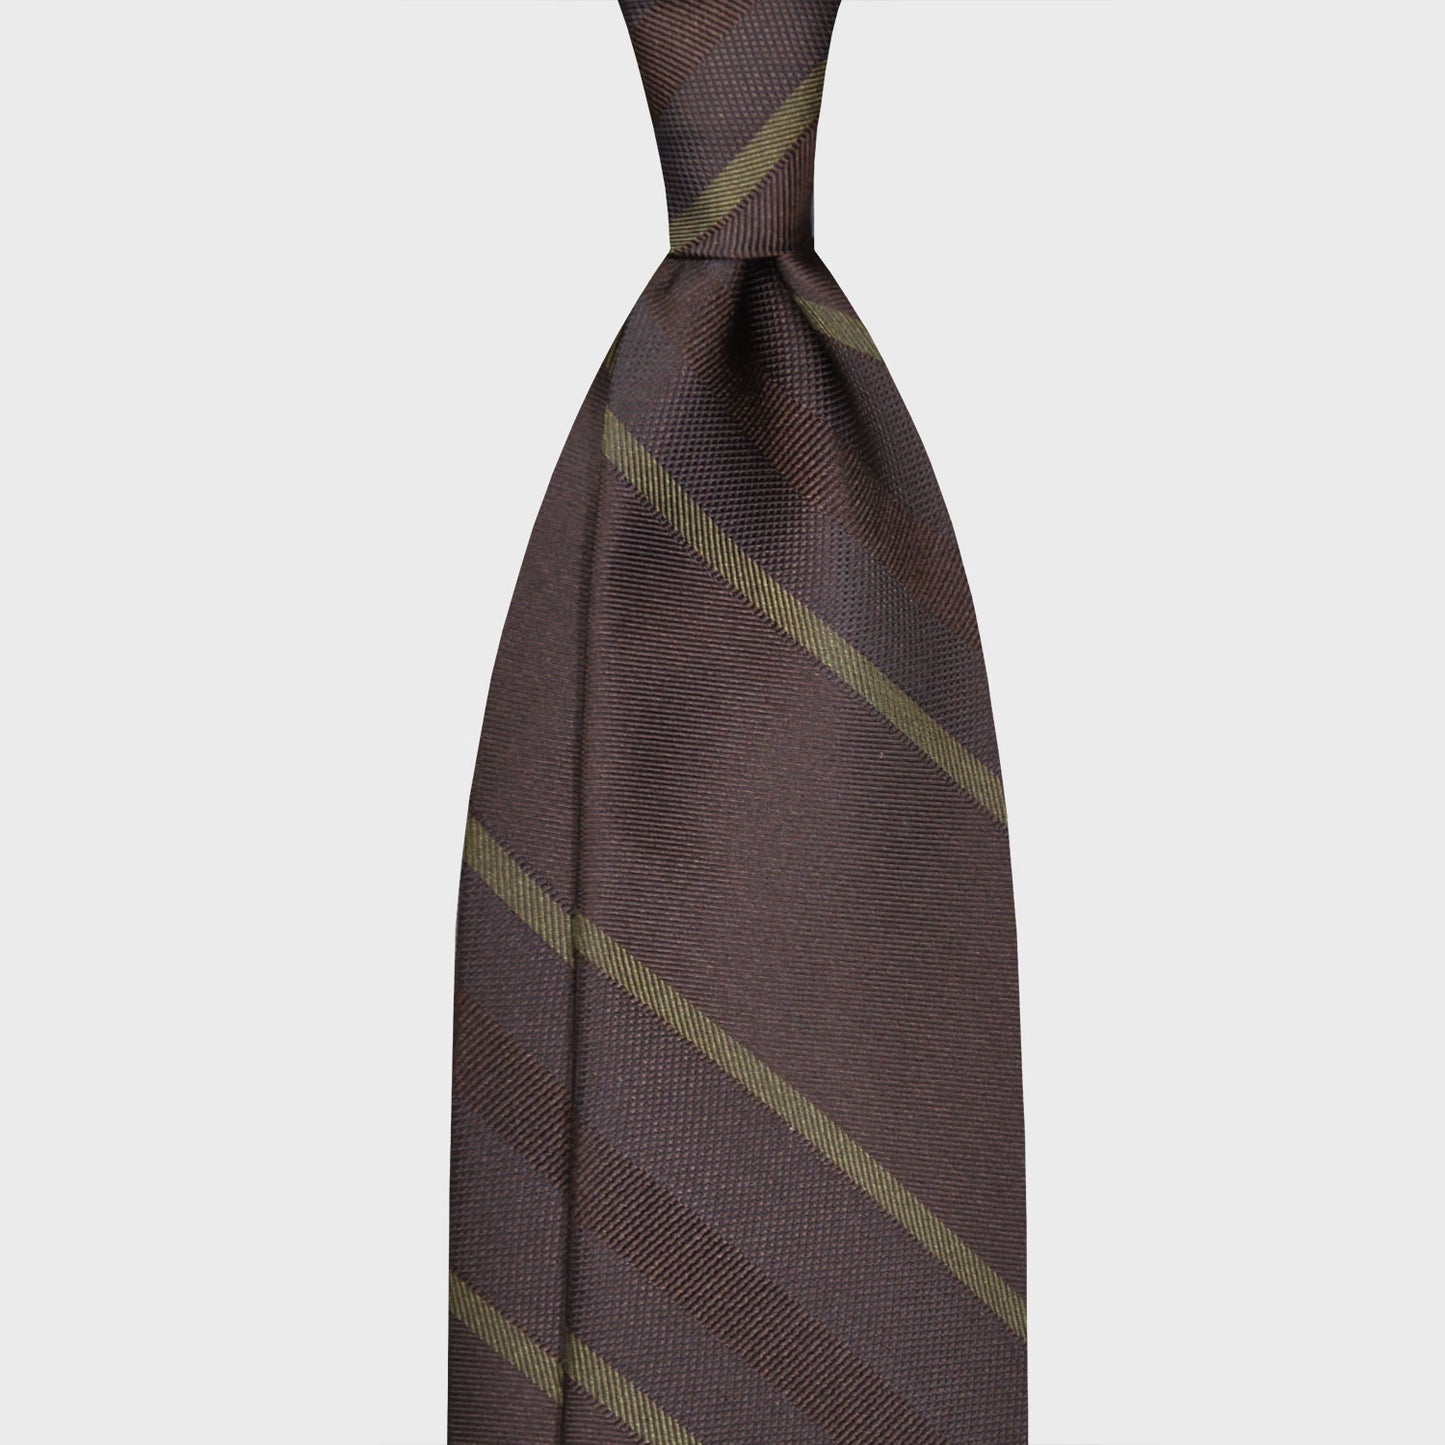 Wengè Brown Regimental Silk Tie. Elegant striped silk necktie, refined wengè brown background with army green striped, handmade in Italy by F.Marino Napoli exclusive for Wools Boutique Uomo, unlined regimental jacquard necktie 3 folds hand rolled edge.